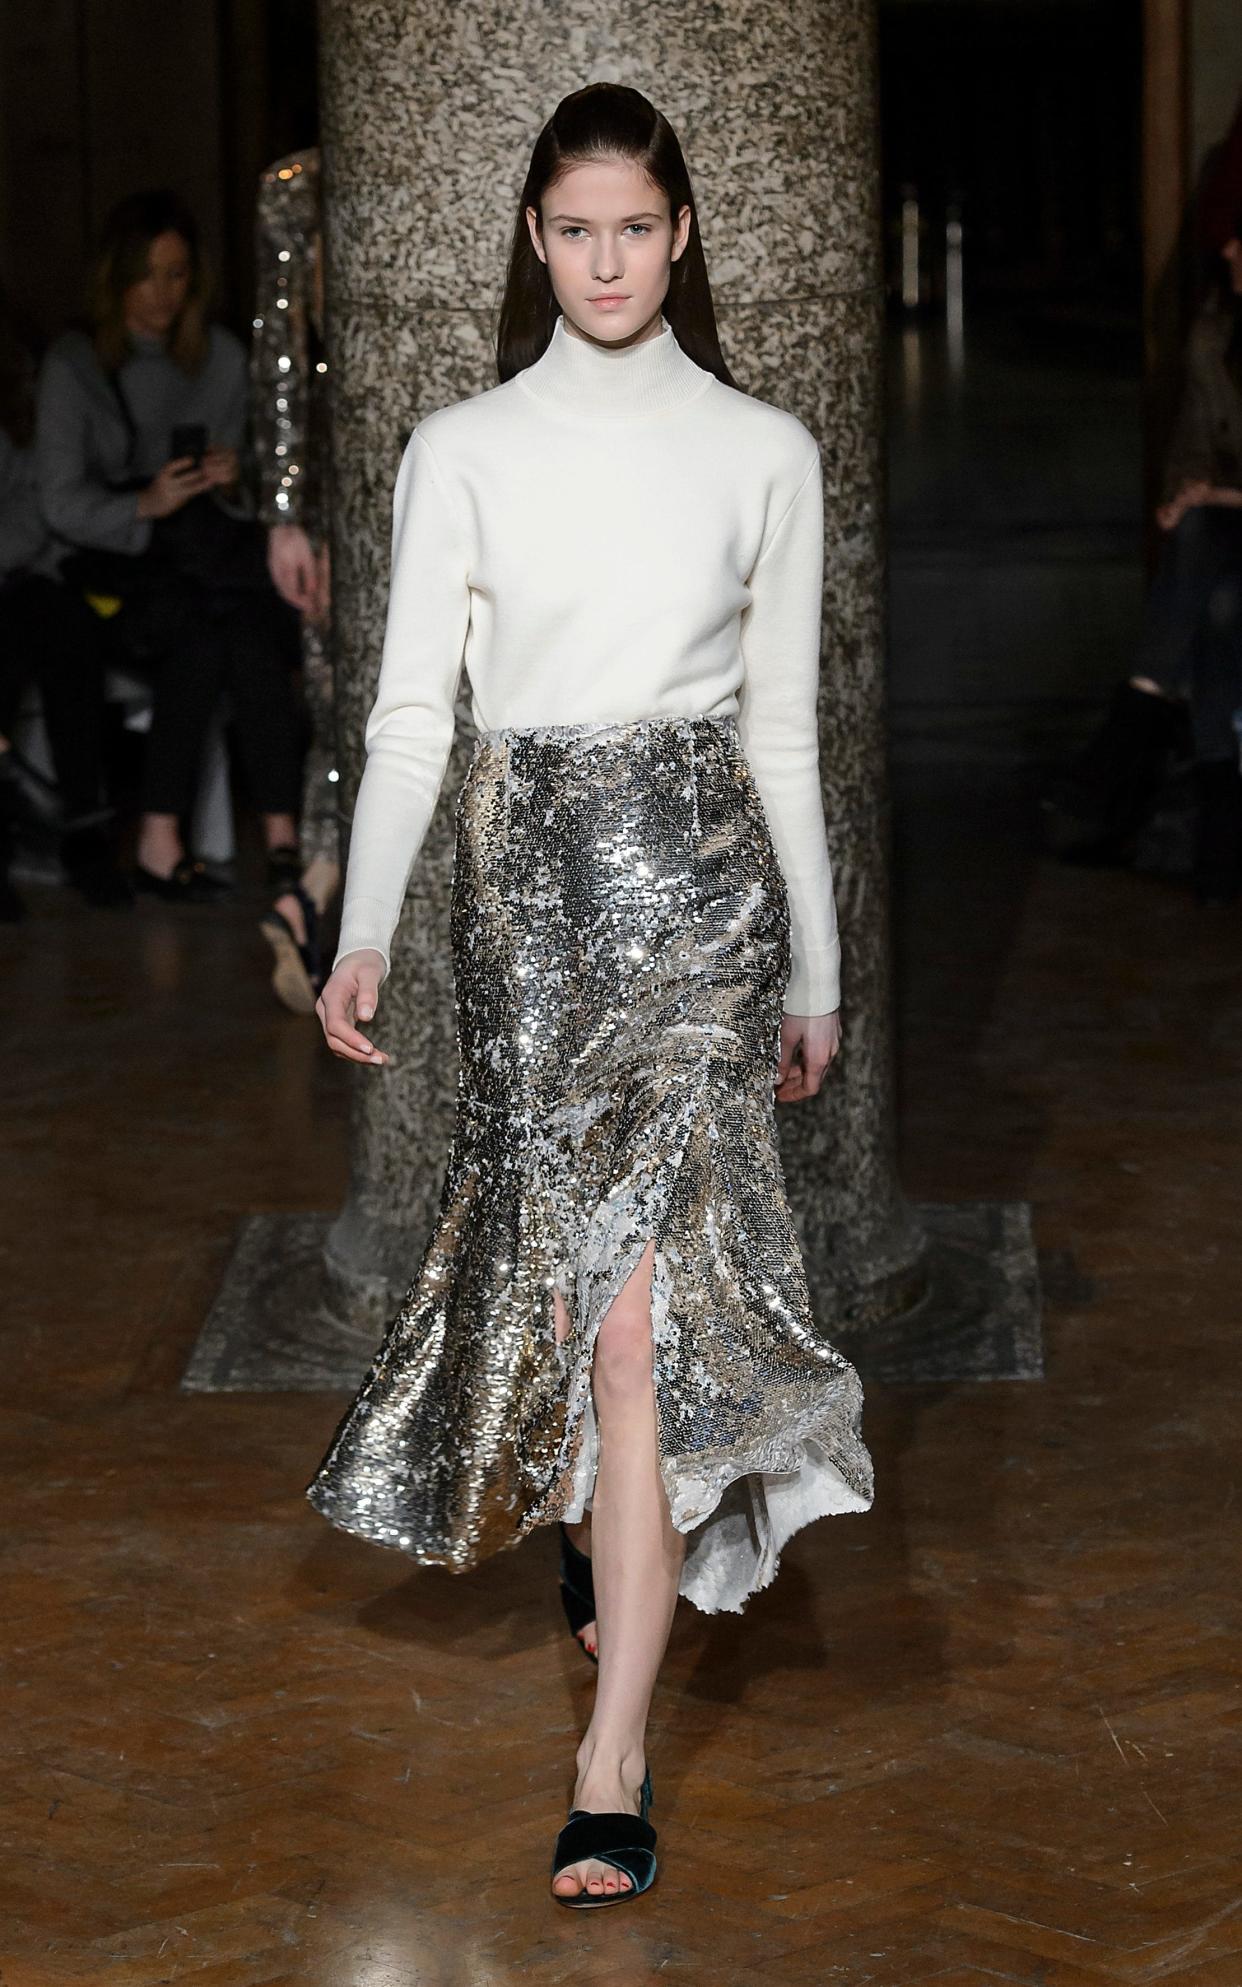 A sequinned skirt and knit are ideal for a chilly new years eve night.  - Isidore Montag 